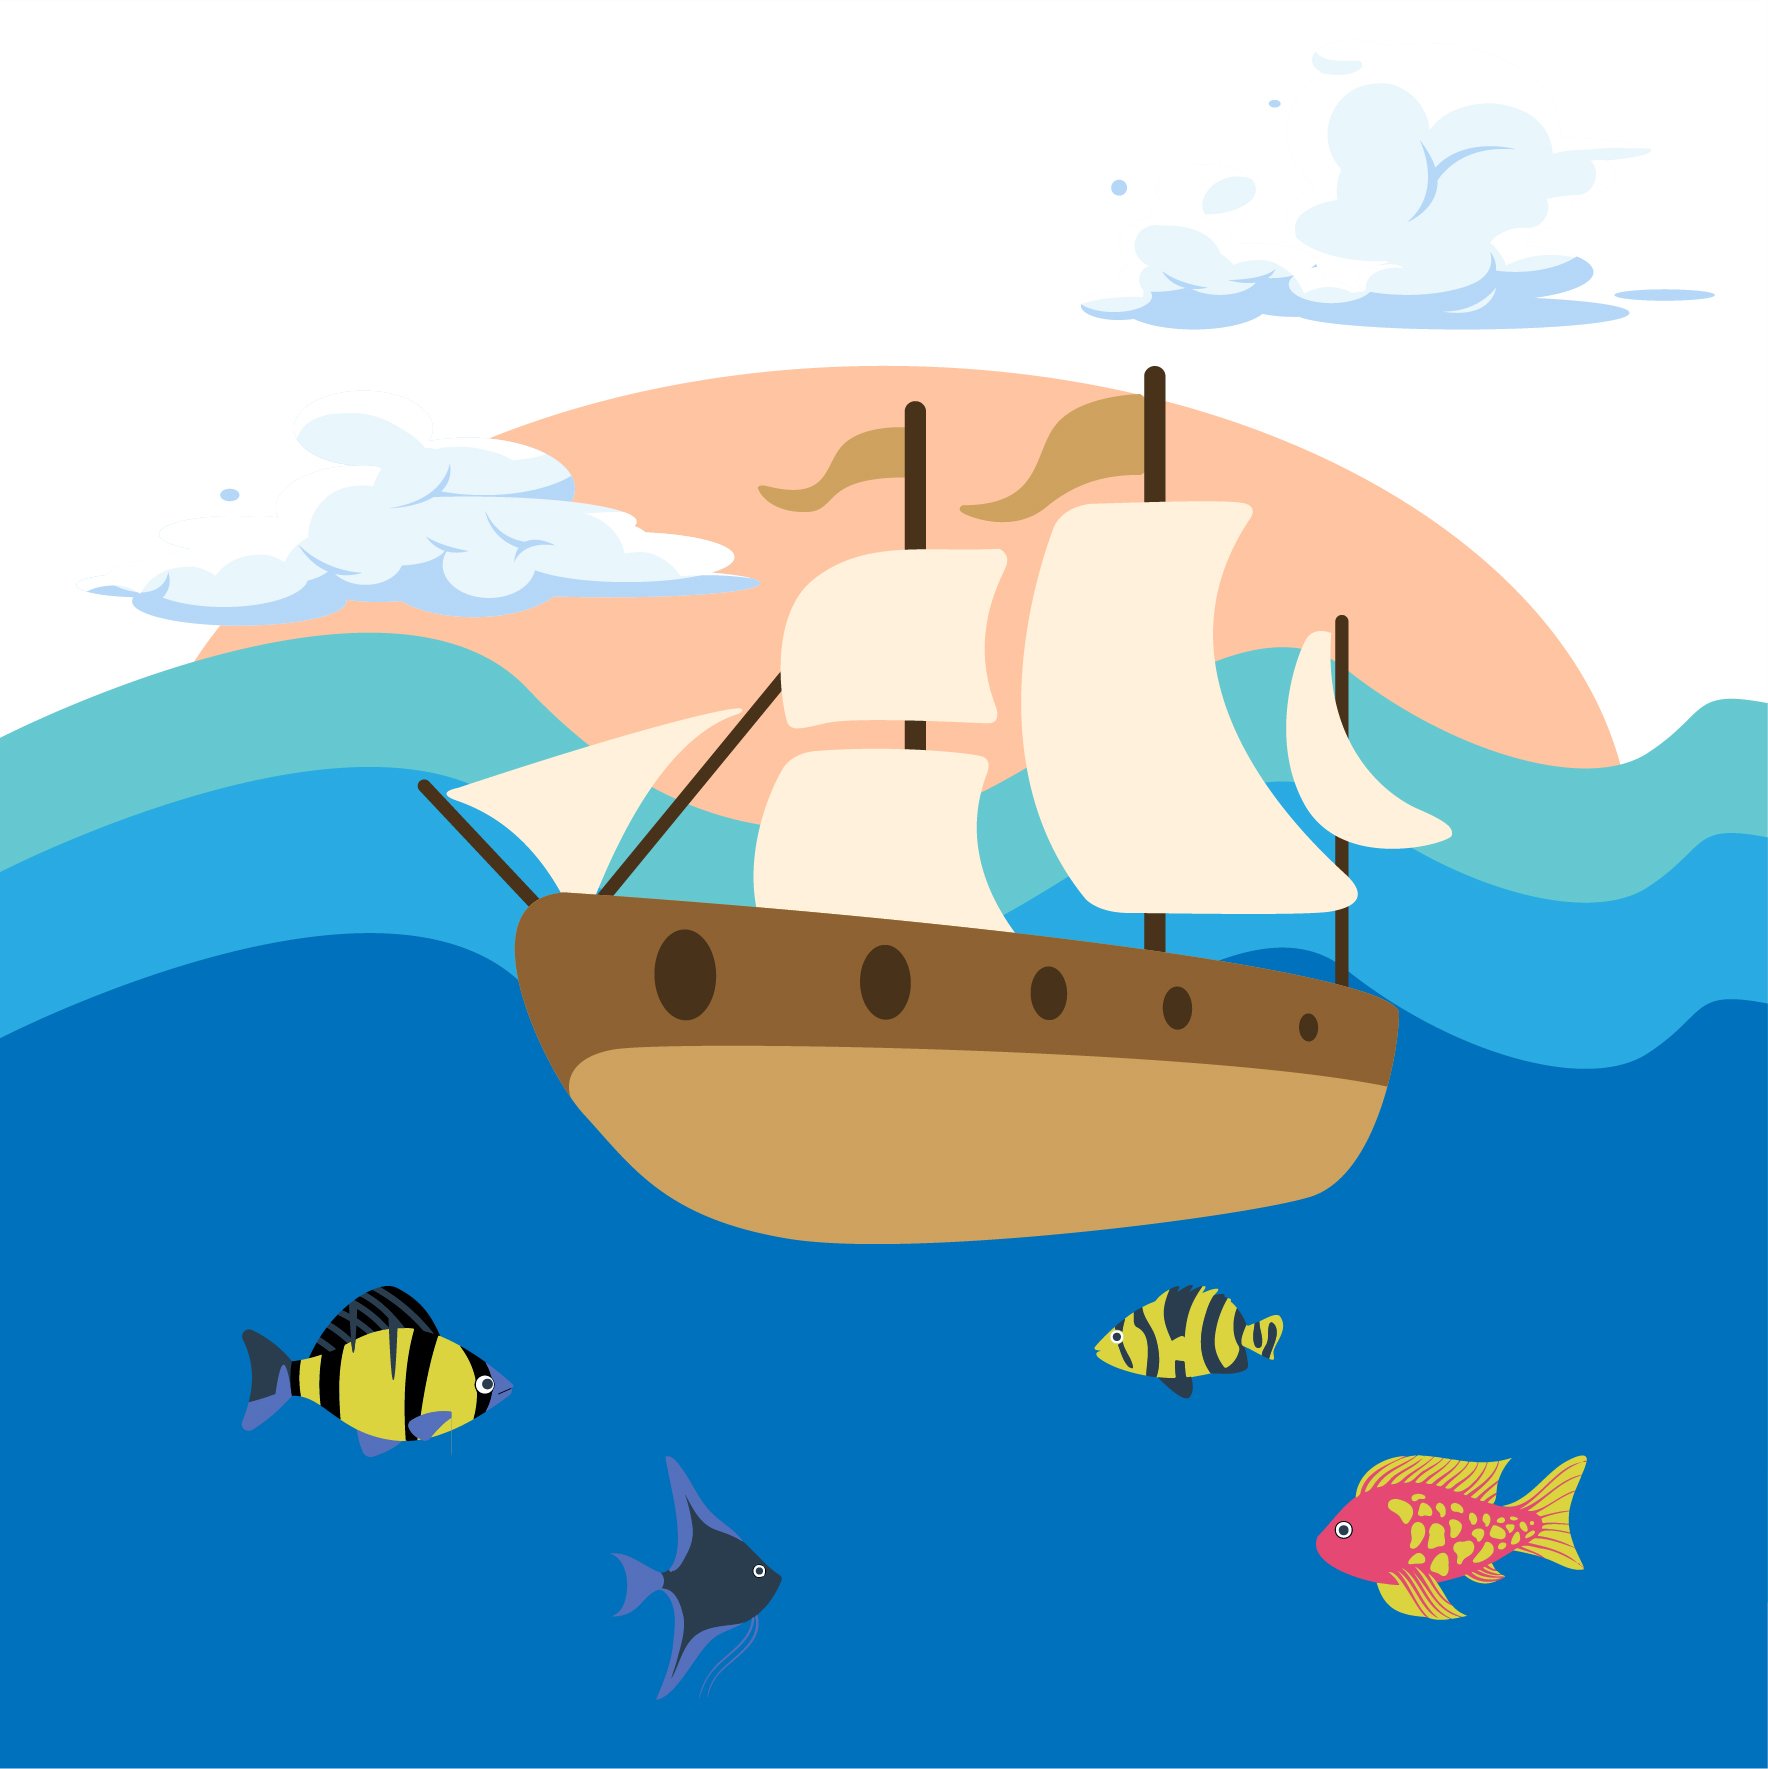 Free National Maritime Day Vector in Illustrator, PSD, EPS, SVG, JPG, PNG